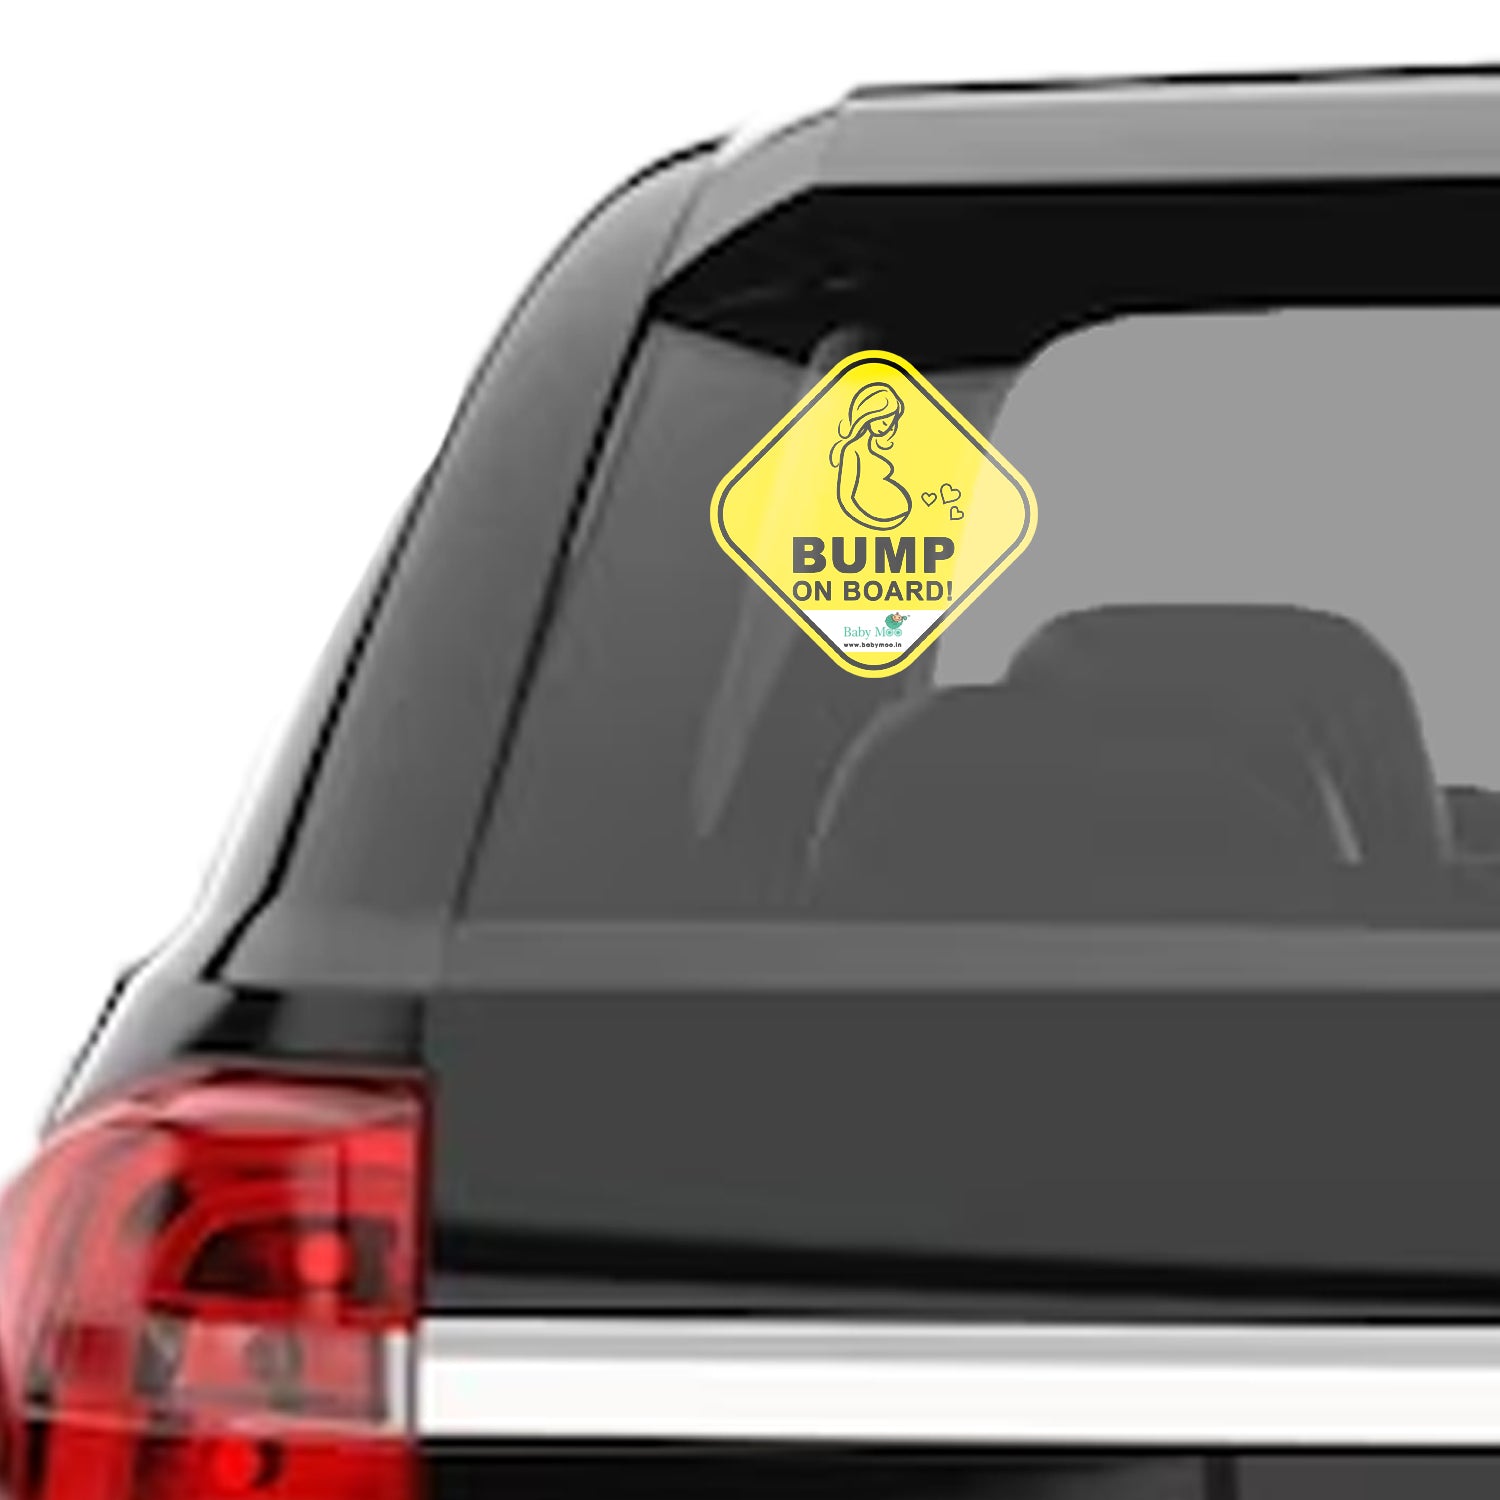 Baby Moo Mama On Board Pregnancy Safety Sign For Car With Vacuum Suction Cup Clip - Yellow - Baby Moo